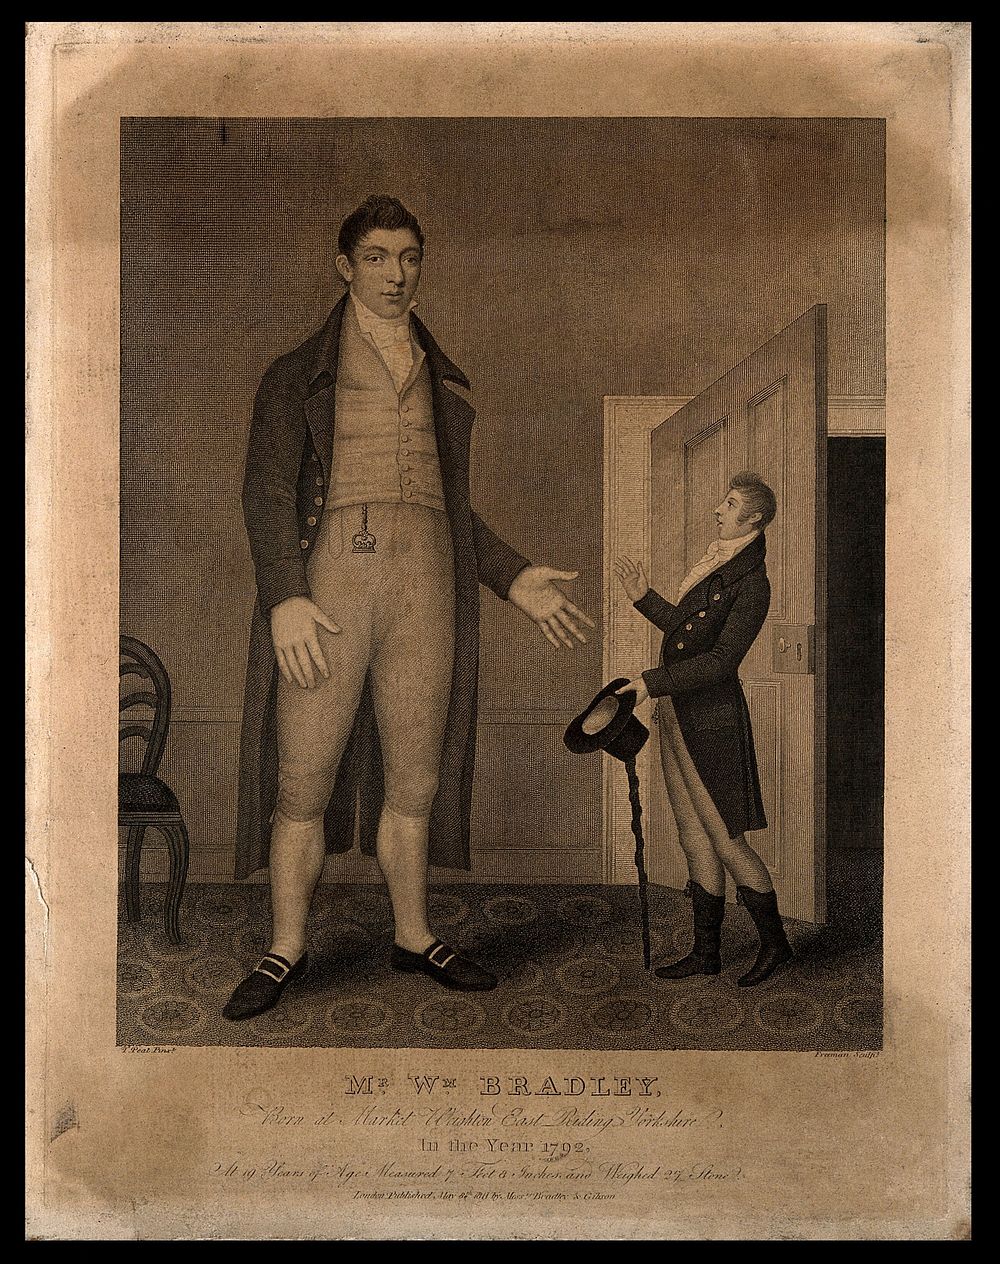 William Bradley, a giant. Engraving by S. Freeman, 1811, after T. Peat.